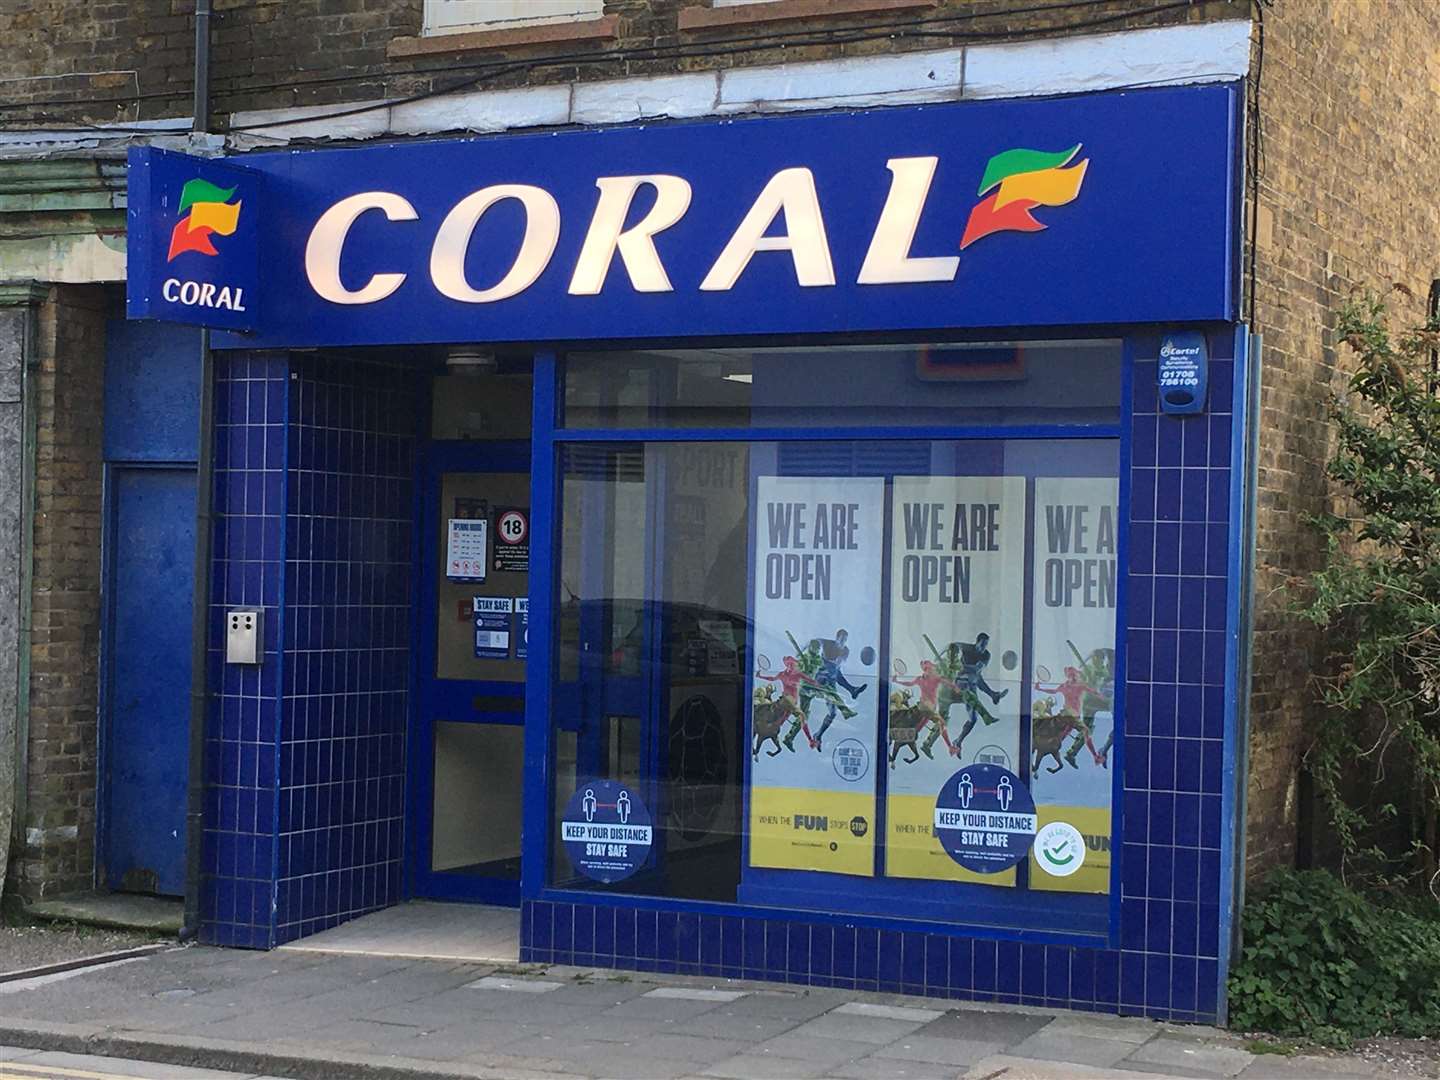 Coral bookmakers in East Street Sittingbourne where Dale Howting's bike was stolen from